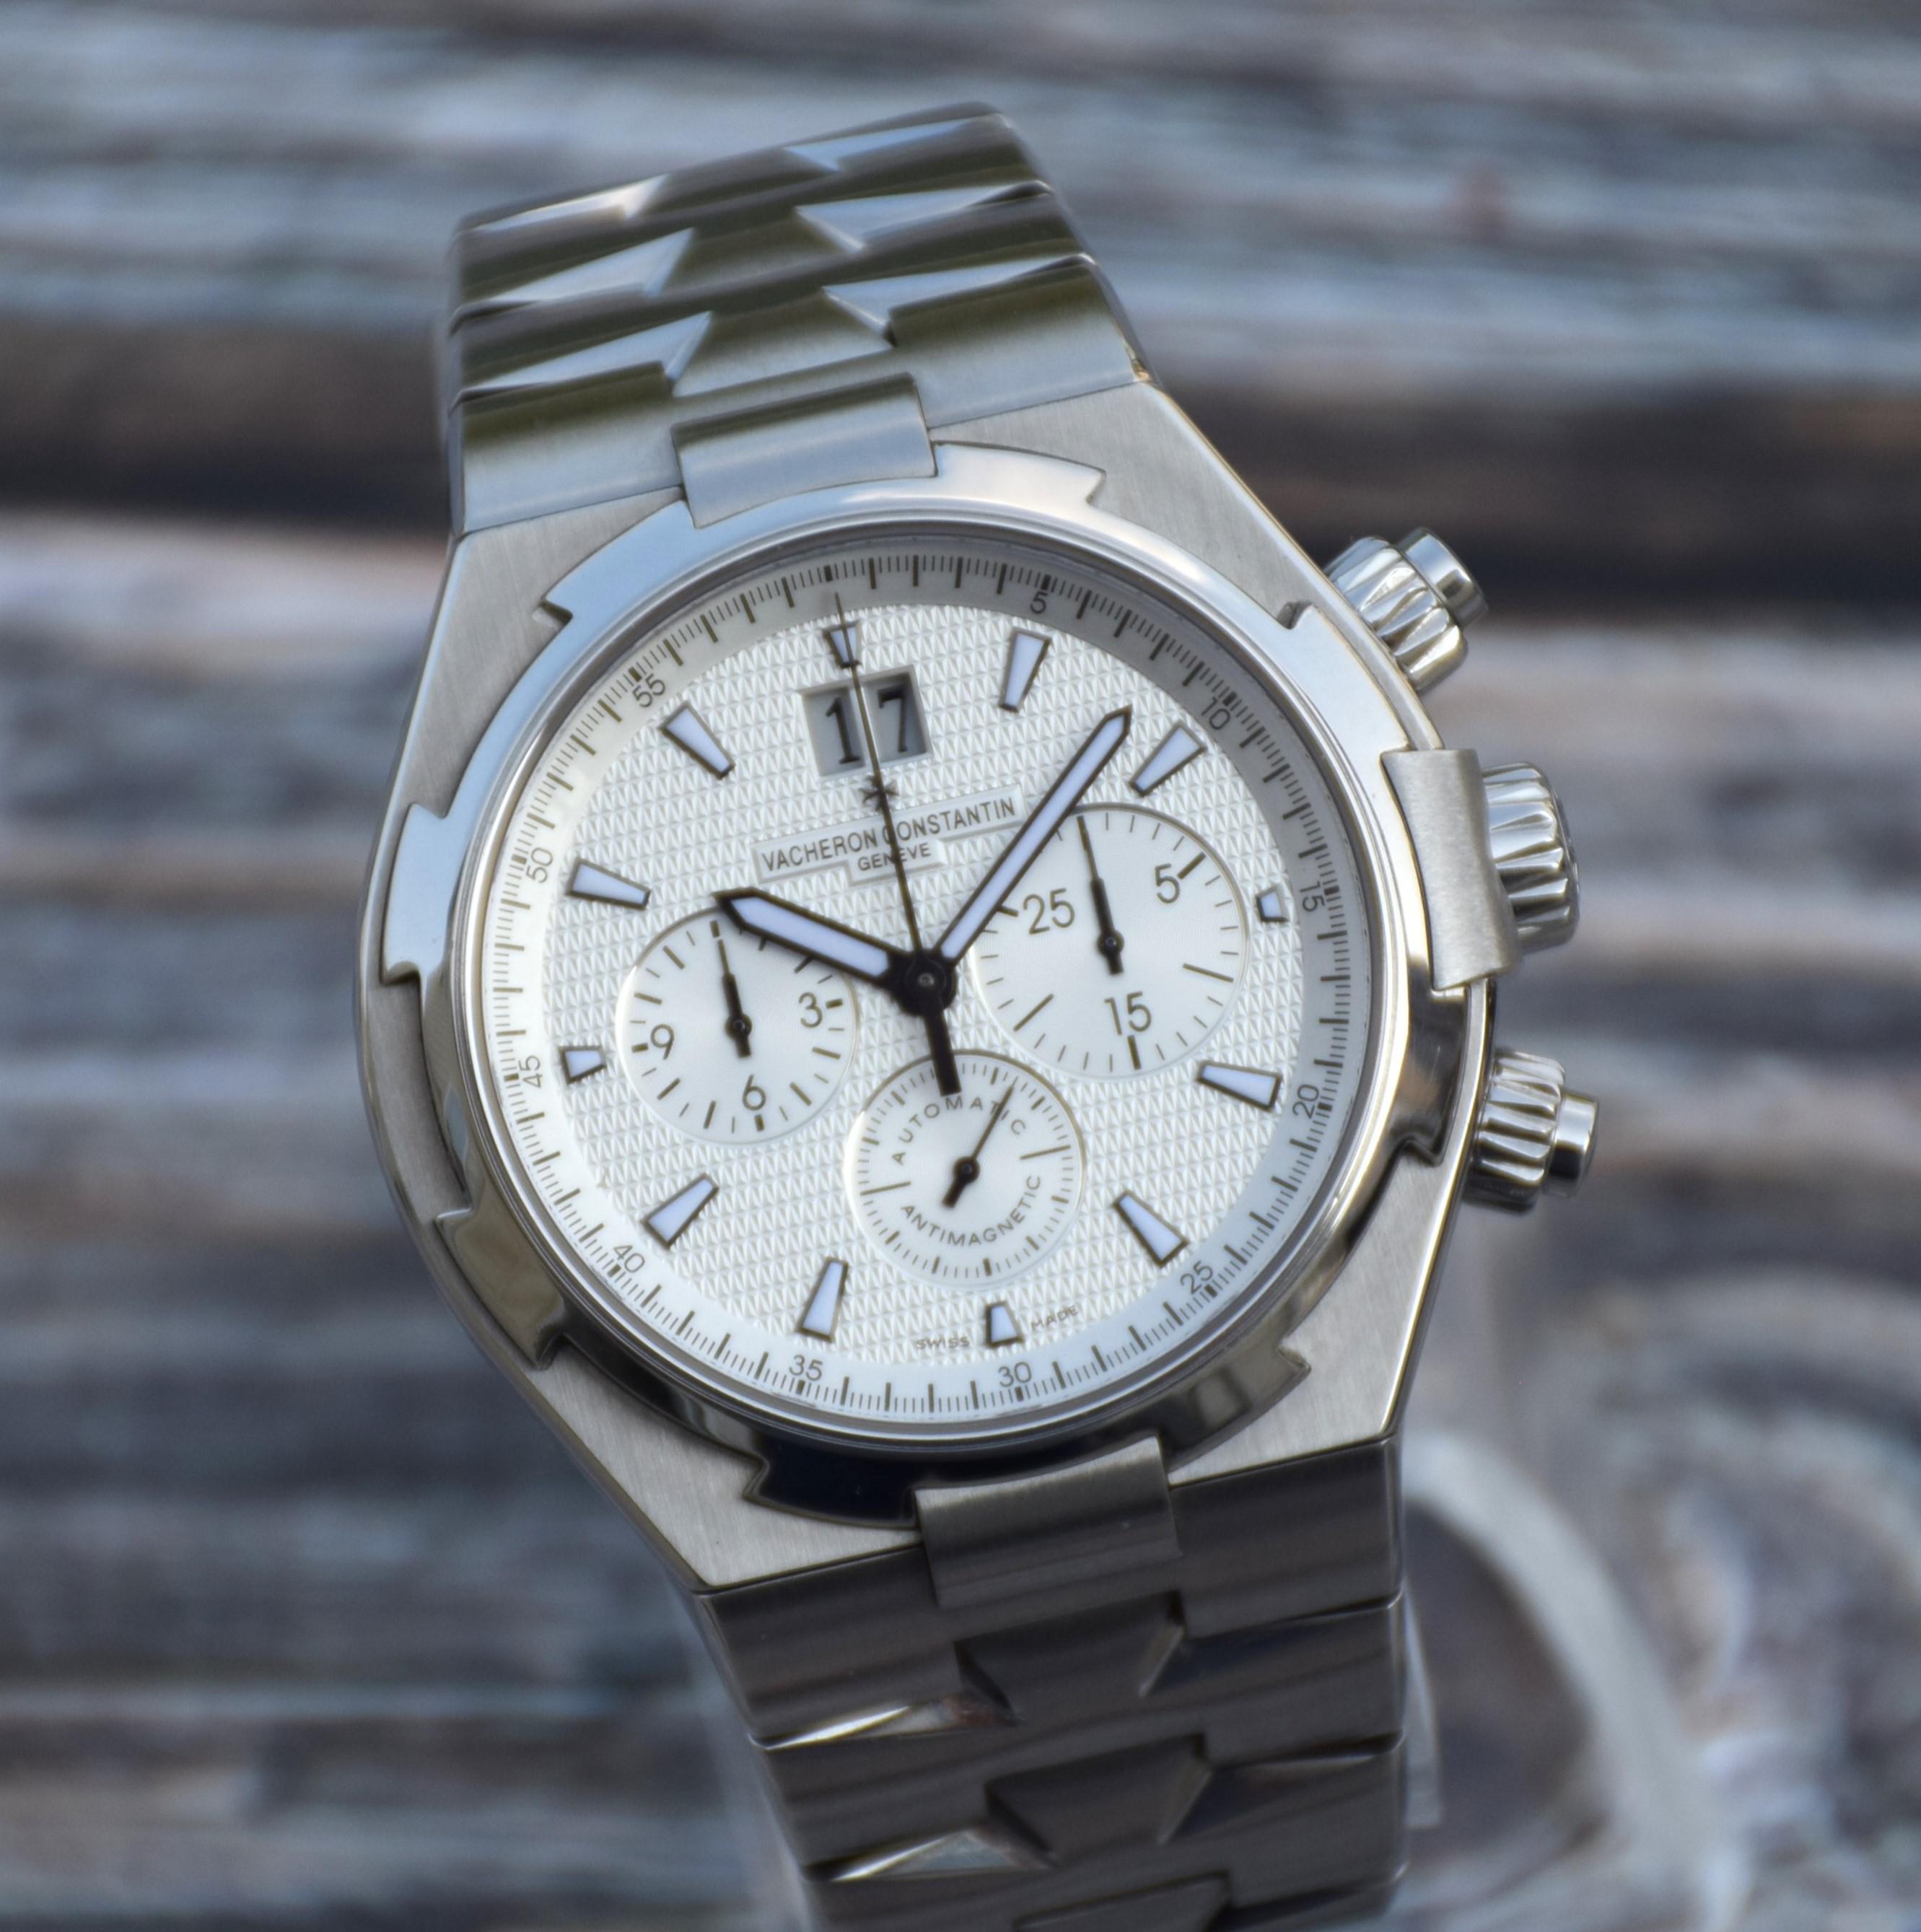 WTS] Vacheron Constantin Overseas Chronograph 49150 White Dial Box & Papers  Serviced! : r/Watchexchange